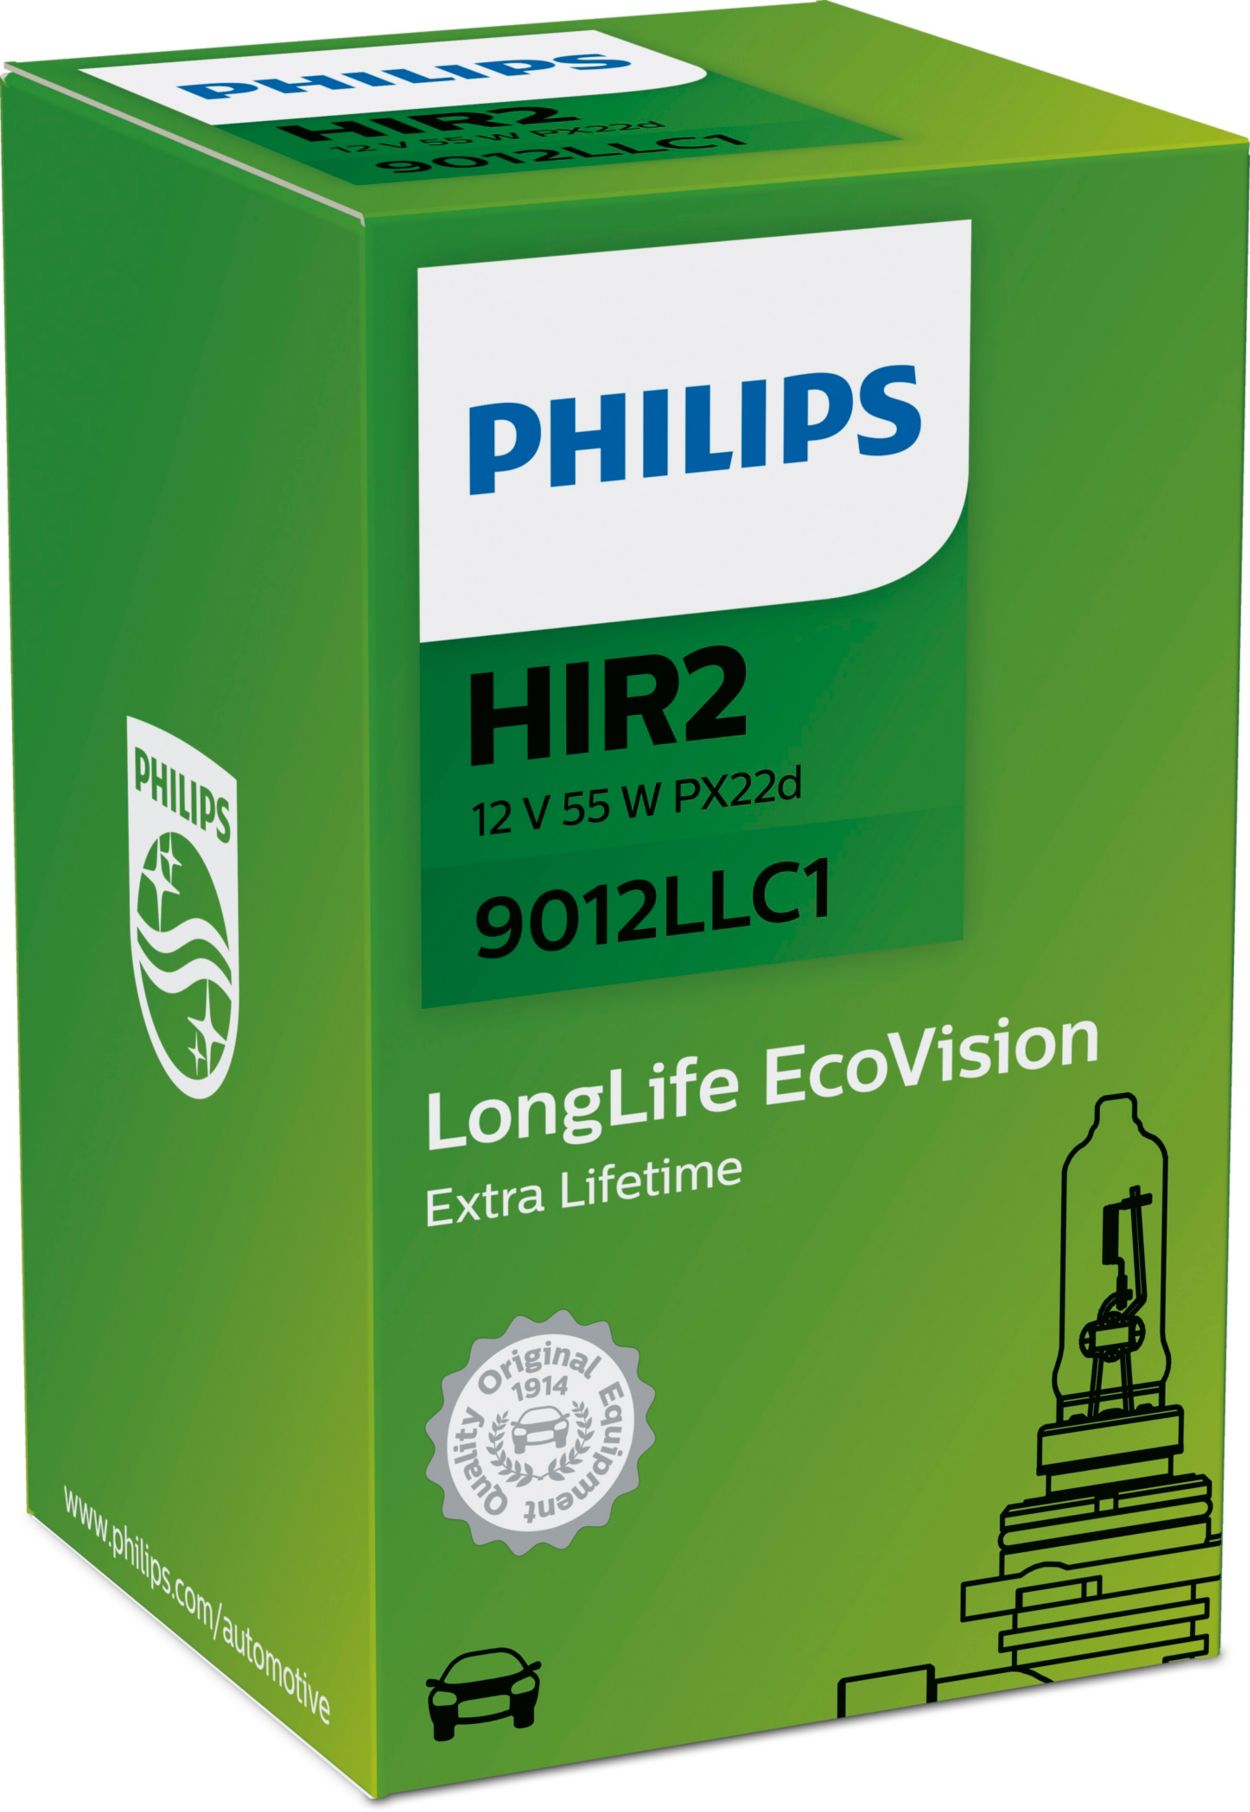 https://images.philips.com/is/image/philipsconsumer/acd63fd4eb2545988cb1afab00d040a9?$jpglarge$&wid=1250